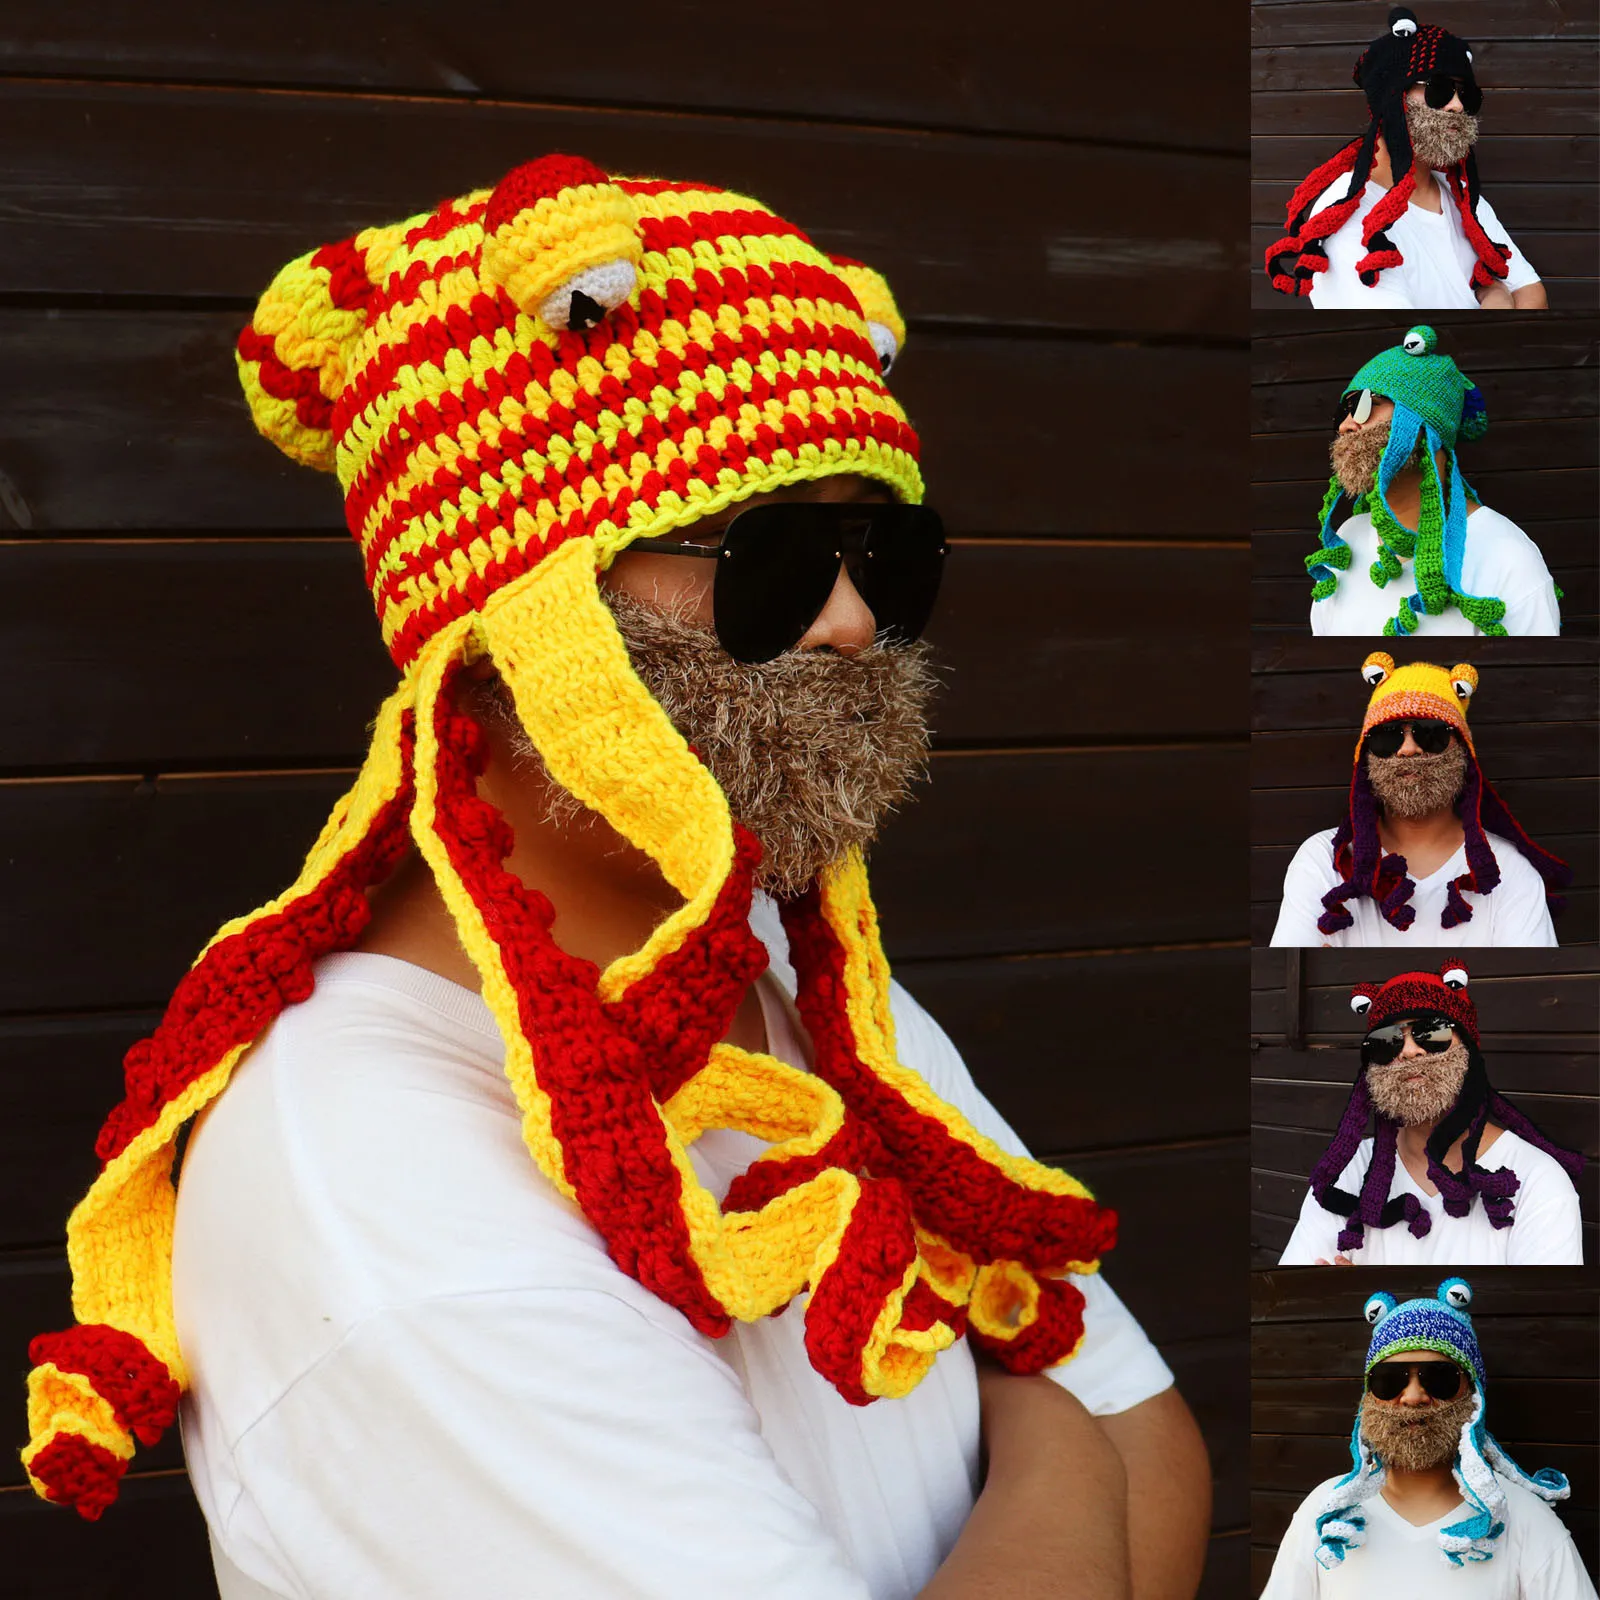 

Octopus Beard Hand Weave Knit Wool Hats Men Christmas Cosplay Party Funny Tricky Headgear Winter Warm Couples Hat Beanies Caps